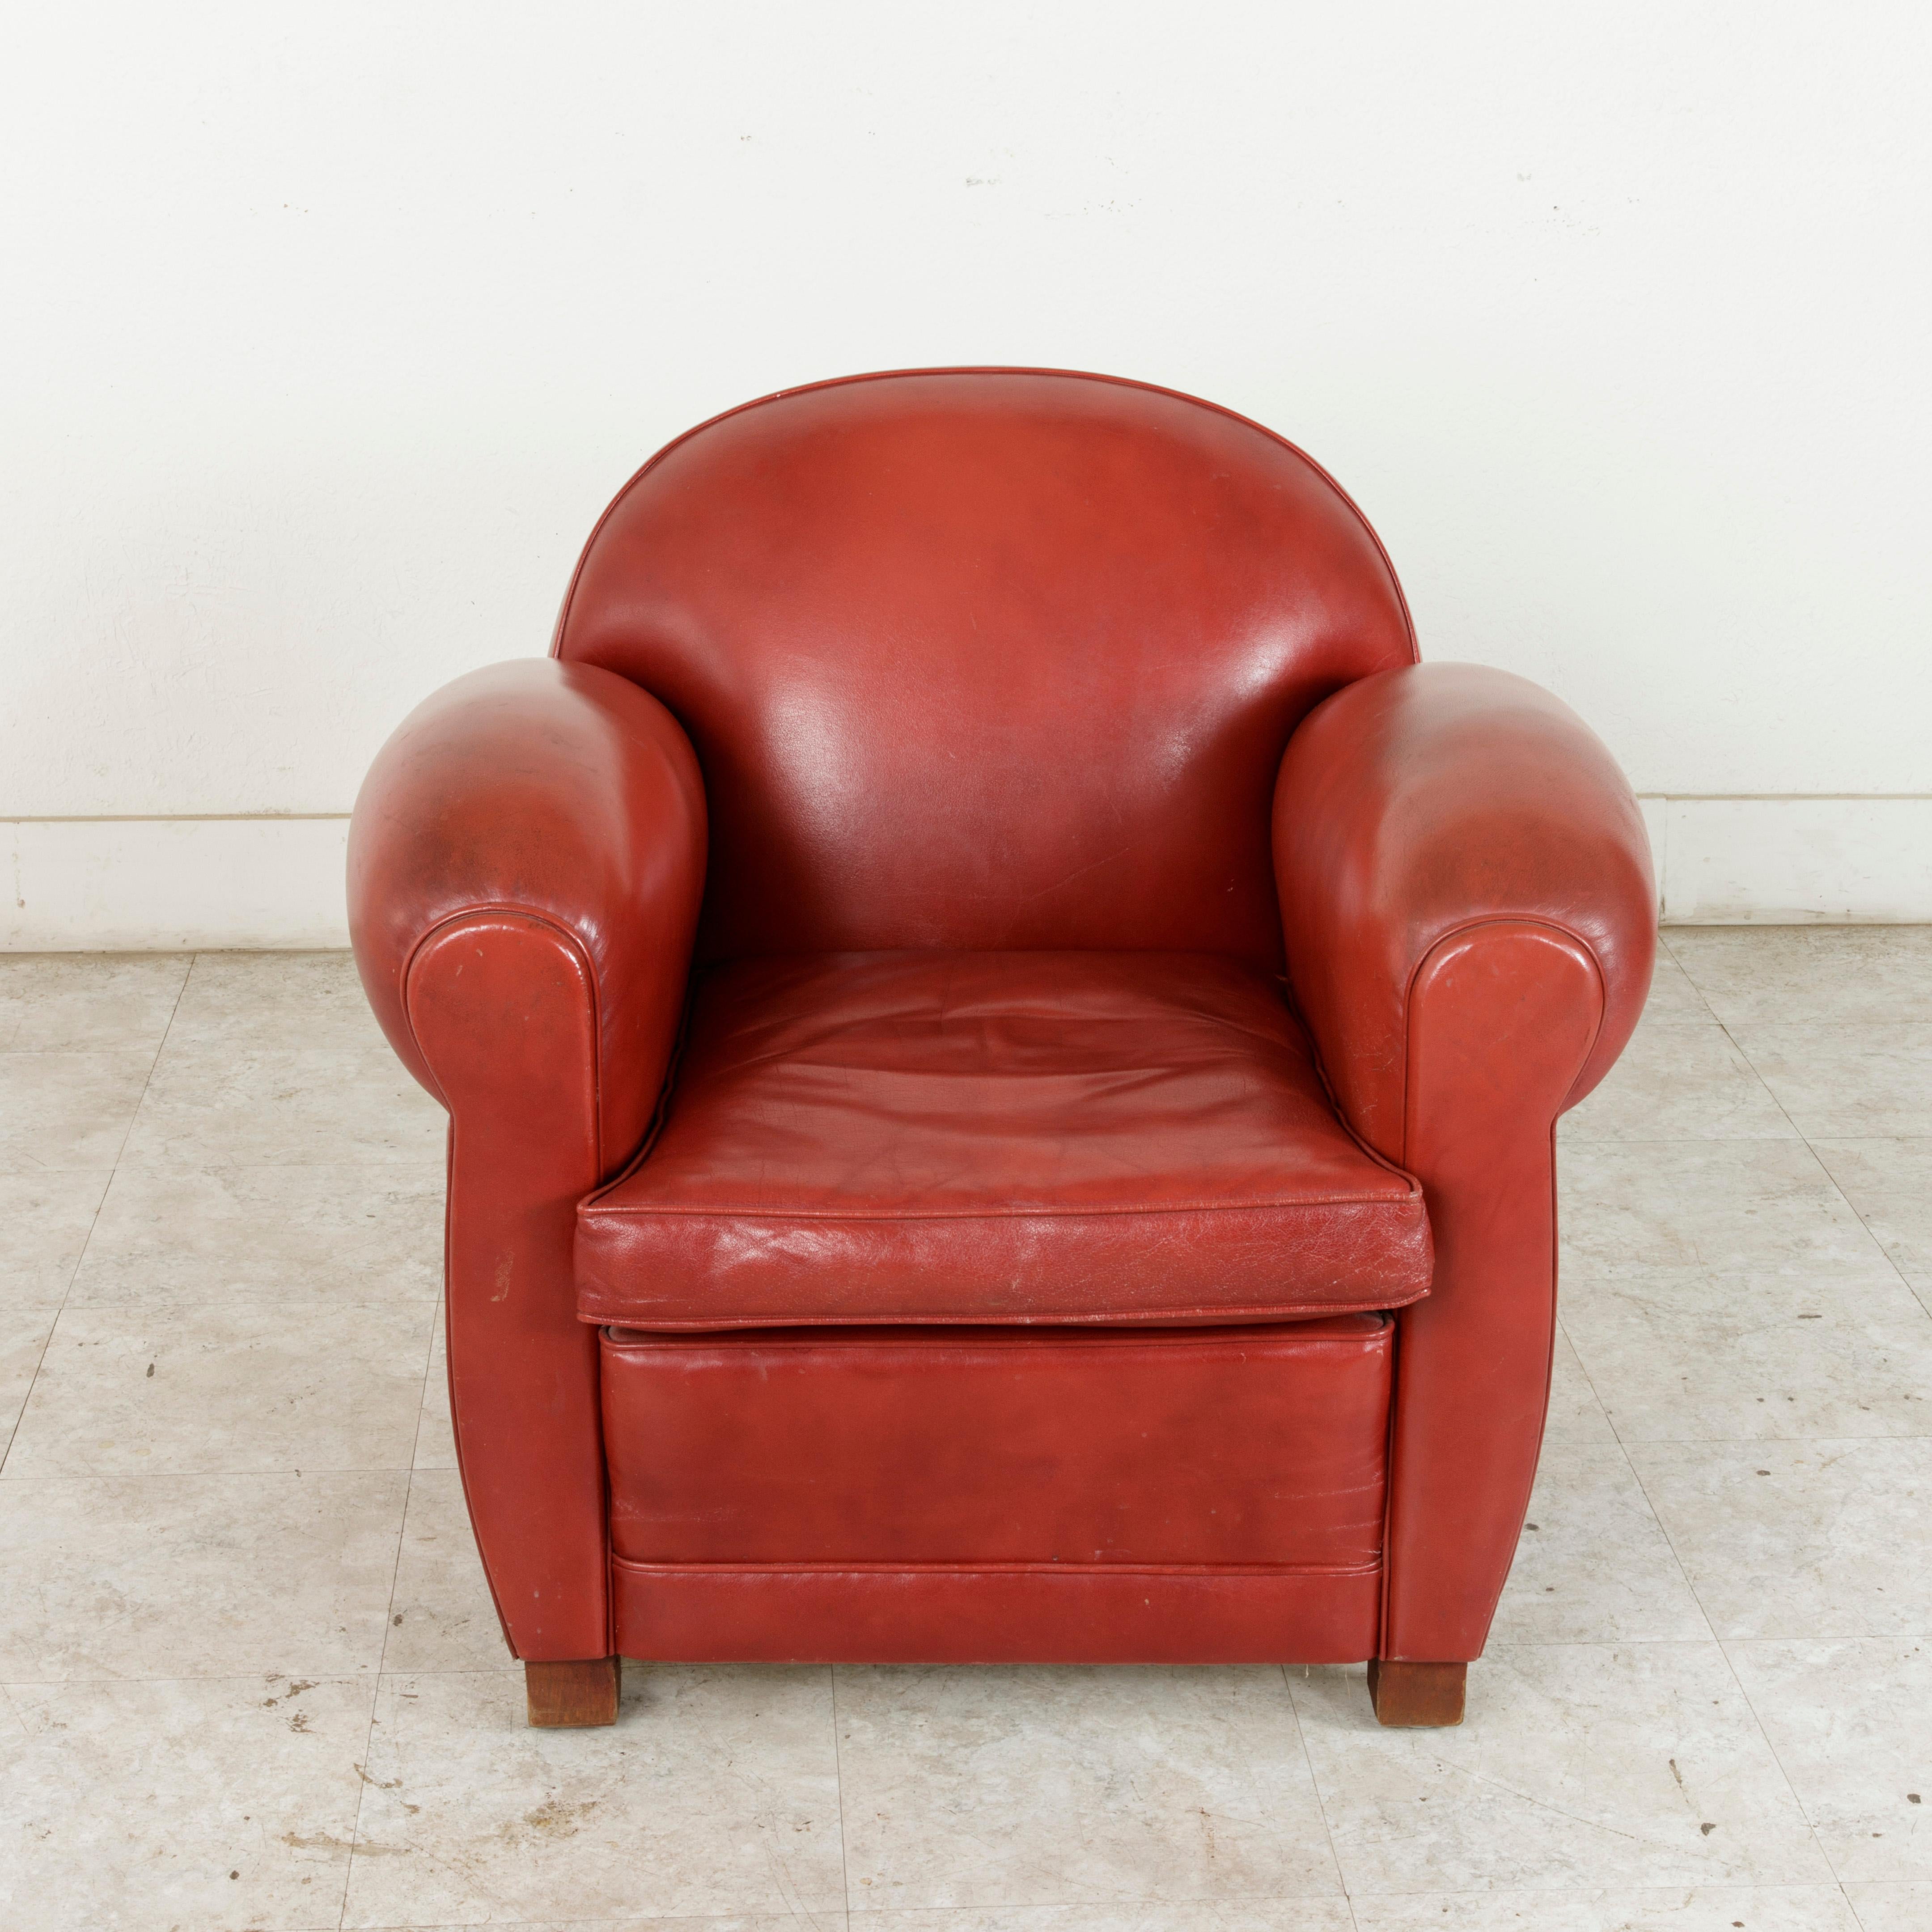 This mid-20th century French club chair or lounge chair boasts the Classic lines of the 1950s French Art Deco style. In wonderful condition, its original red leather upholstery is smooth to the touch, making this club chair comfortable as well as